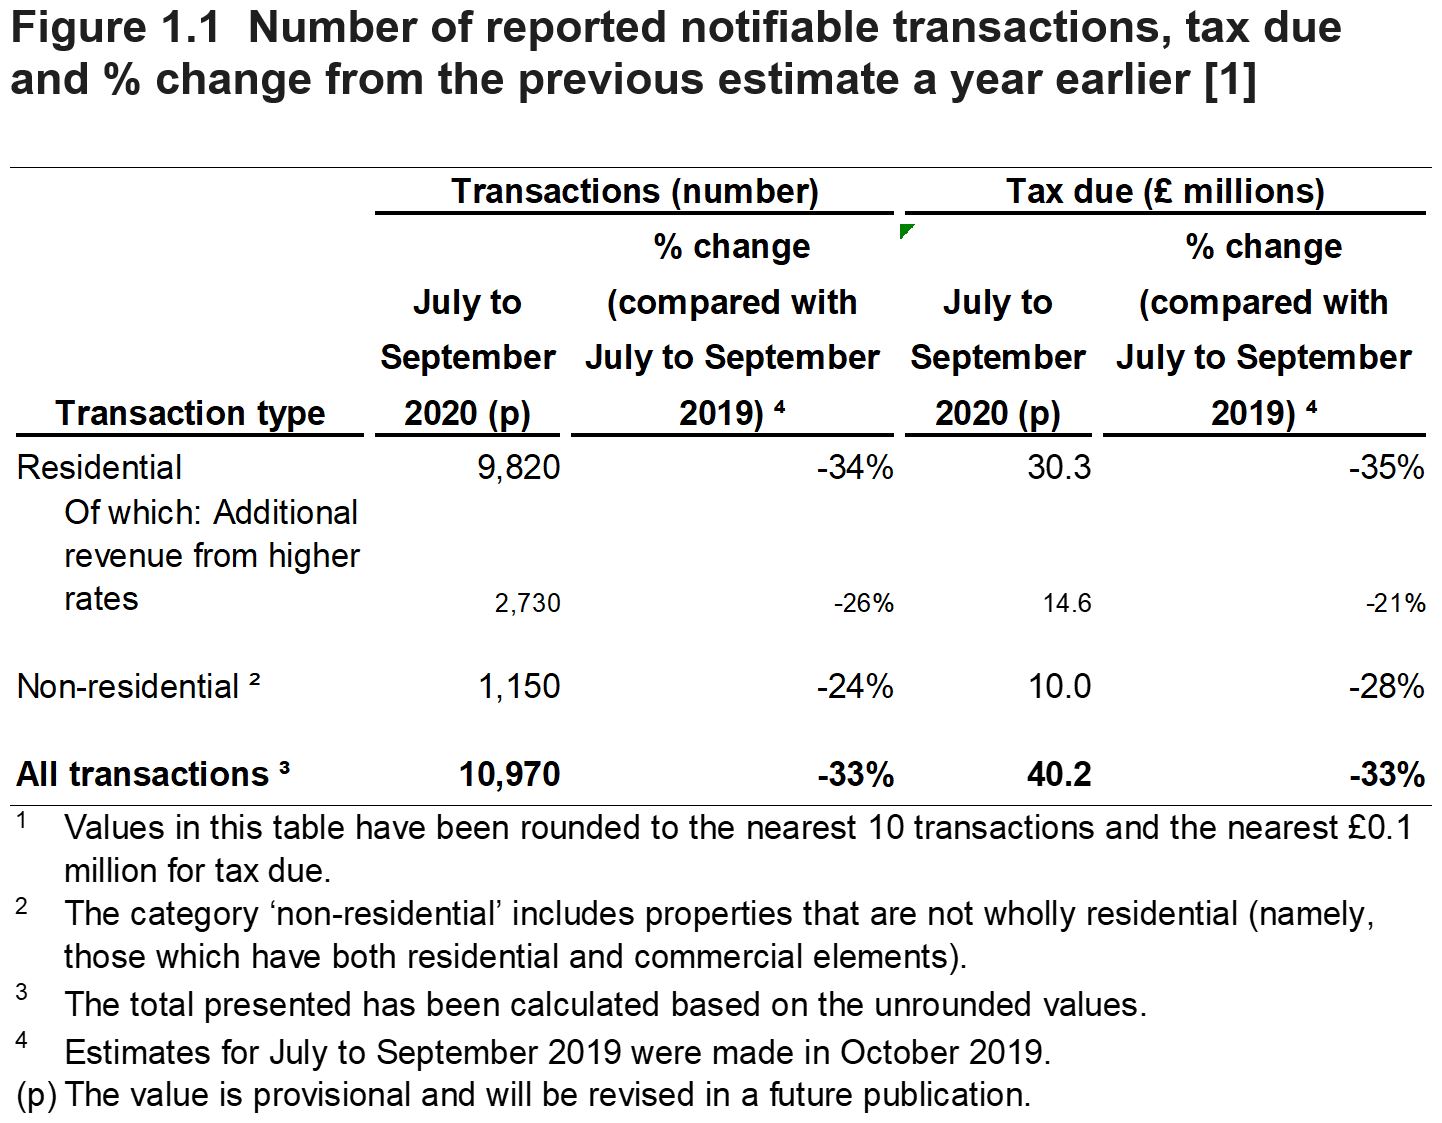 Figure 1.1 shows the number of reported notifiable transactions, tax due and % change from the previous estimate a year earlier. These values are shown for July to September 2020, with a breakdown by type of transaction.